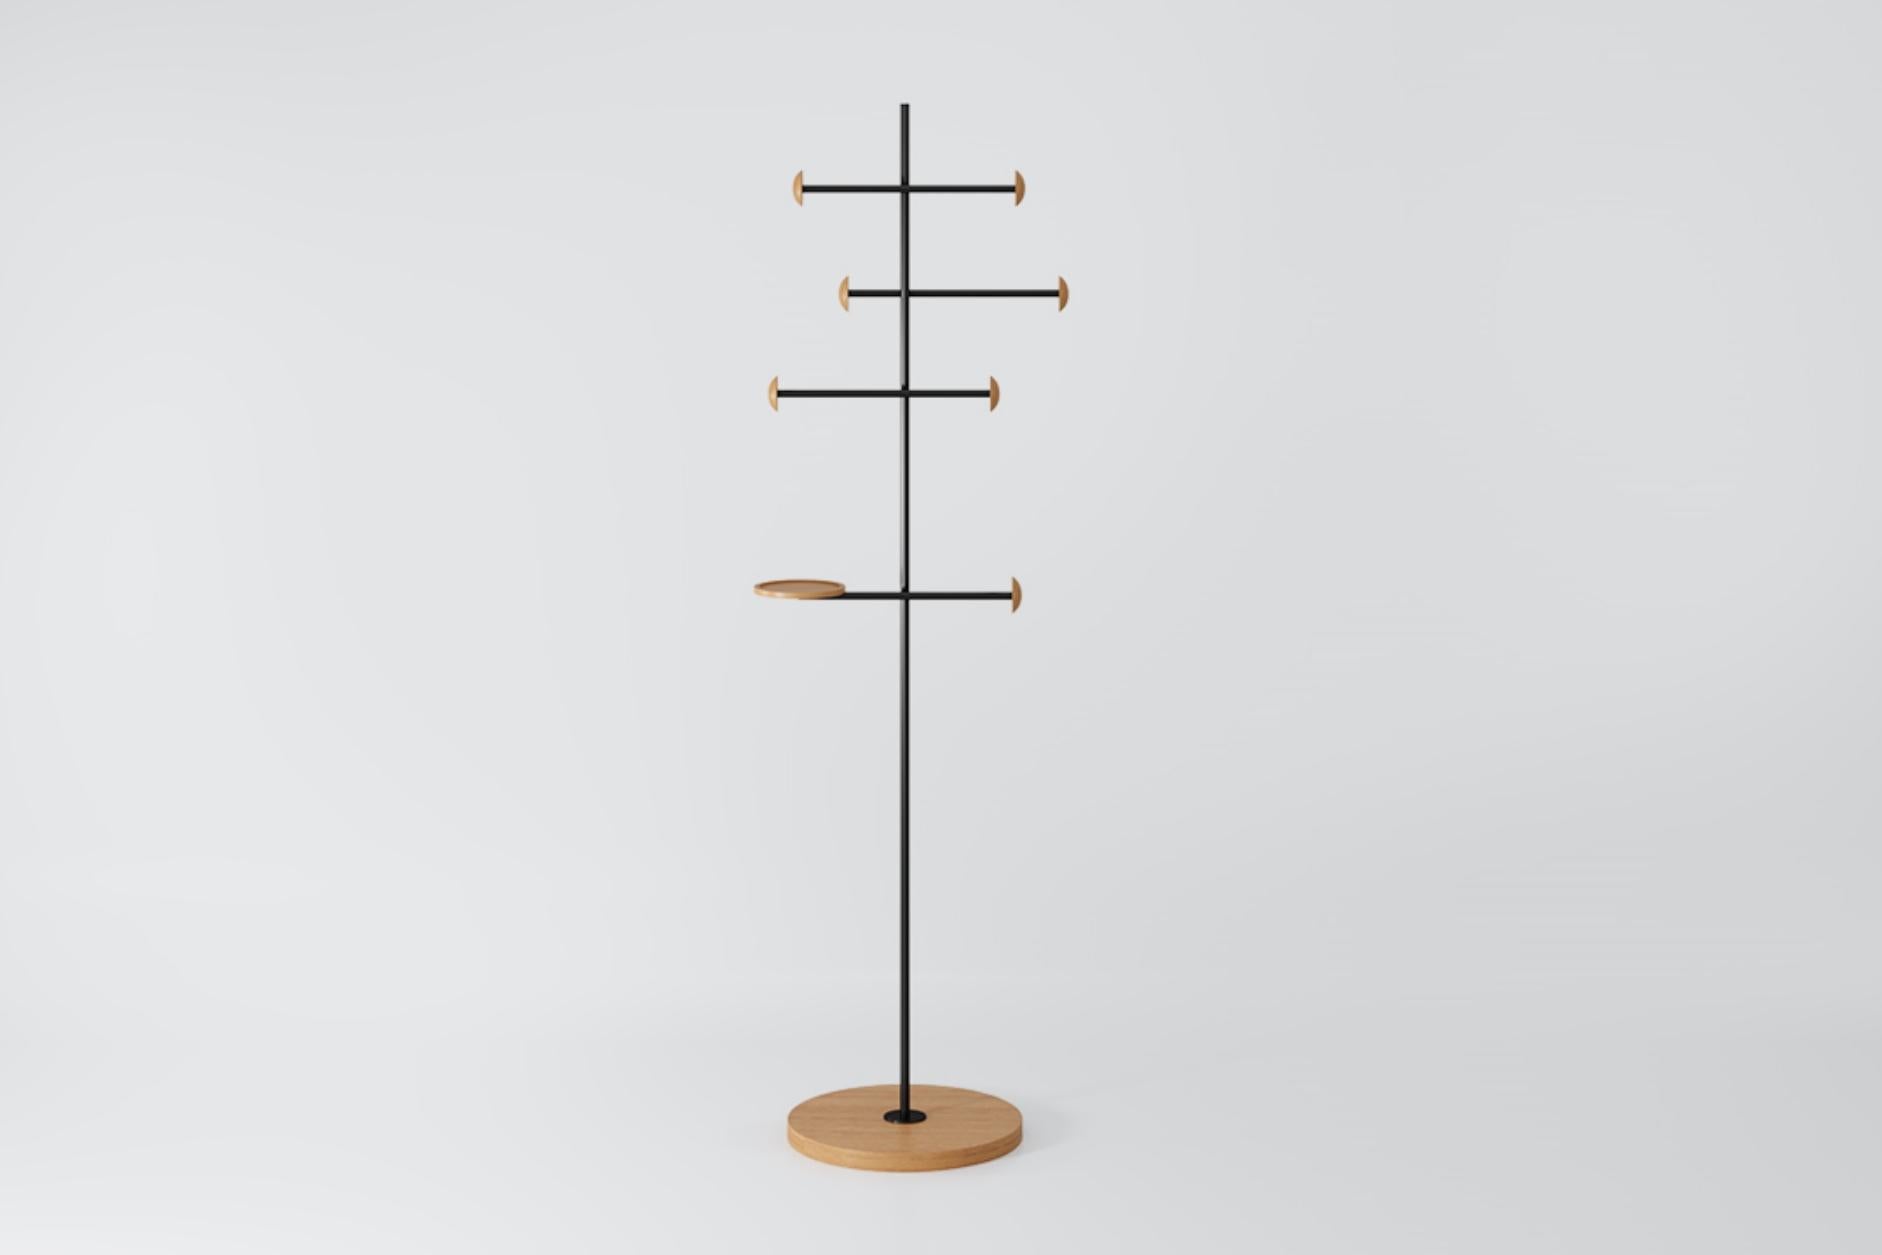 The Schiap coat rack is a loving tribute to Elsa Schiaparelli and the iconic “skeleton” dress that the innovative designer created in collaboration with Salvador Dalí in 1936. Schiap, as she was affectionately called, is as important as Chanel in